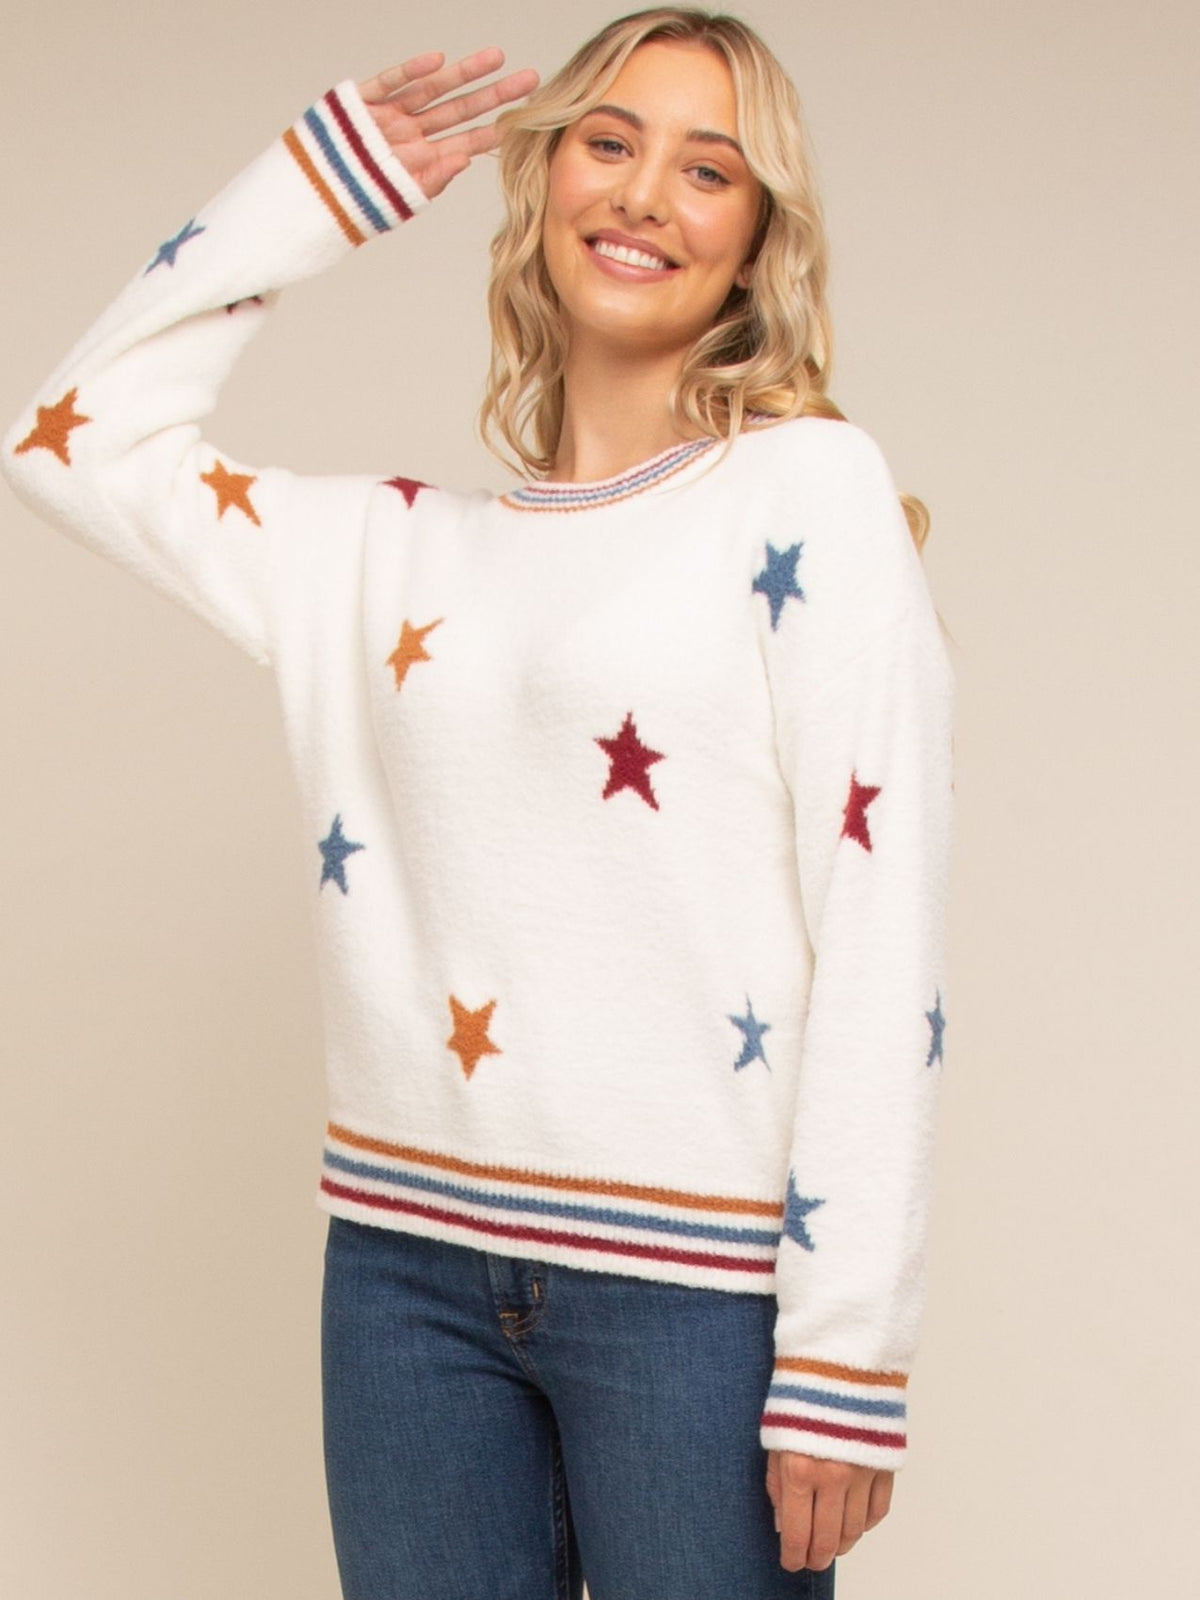 WHIMSY SWEATER - PRE PACK 6 UNITS